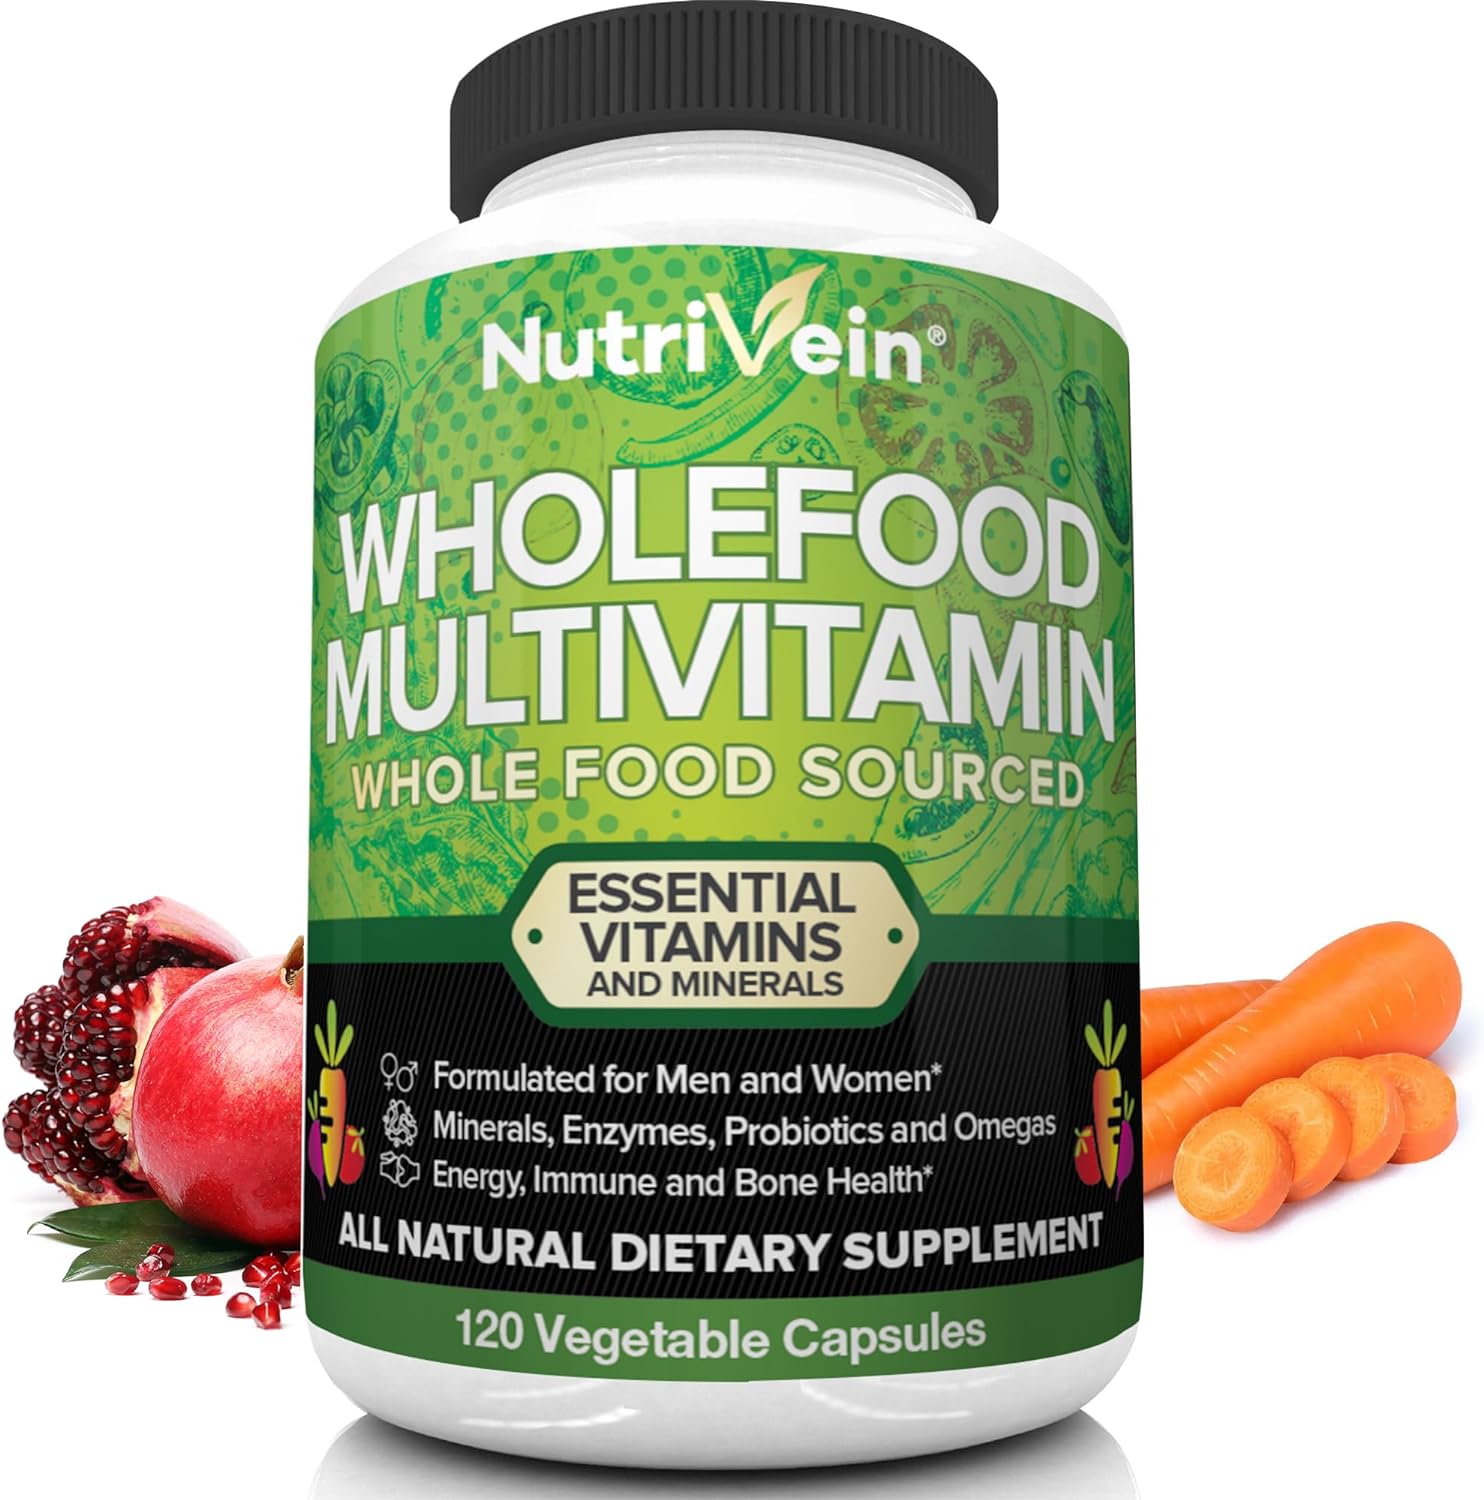 Nutrivein Whole Food Multivitamin - Complete Daily Vitamins for Men and Women from Natural Whole Foods, Real Raw Veggies, Fruits, Vitamin E, A, B Complex - 30 Day Supply (120 Capsules, Four Daily)